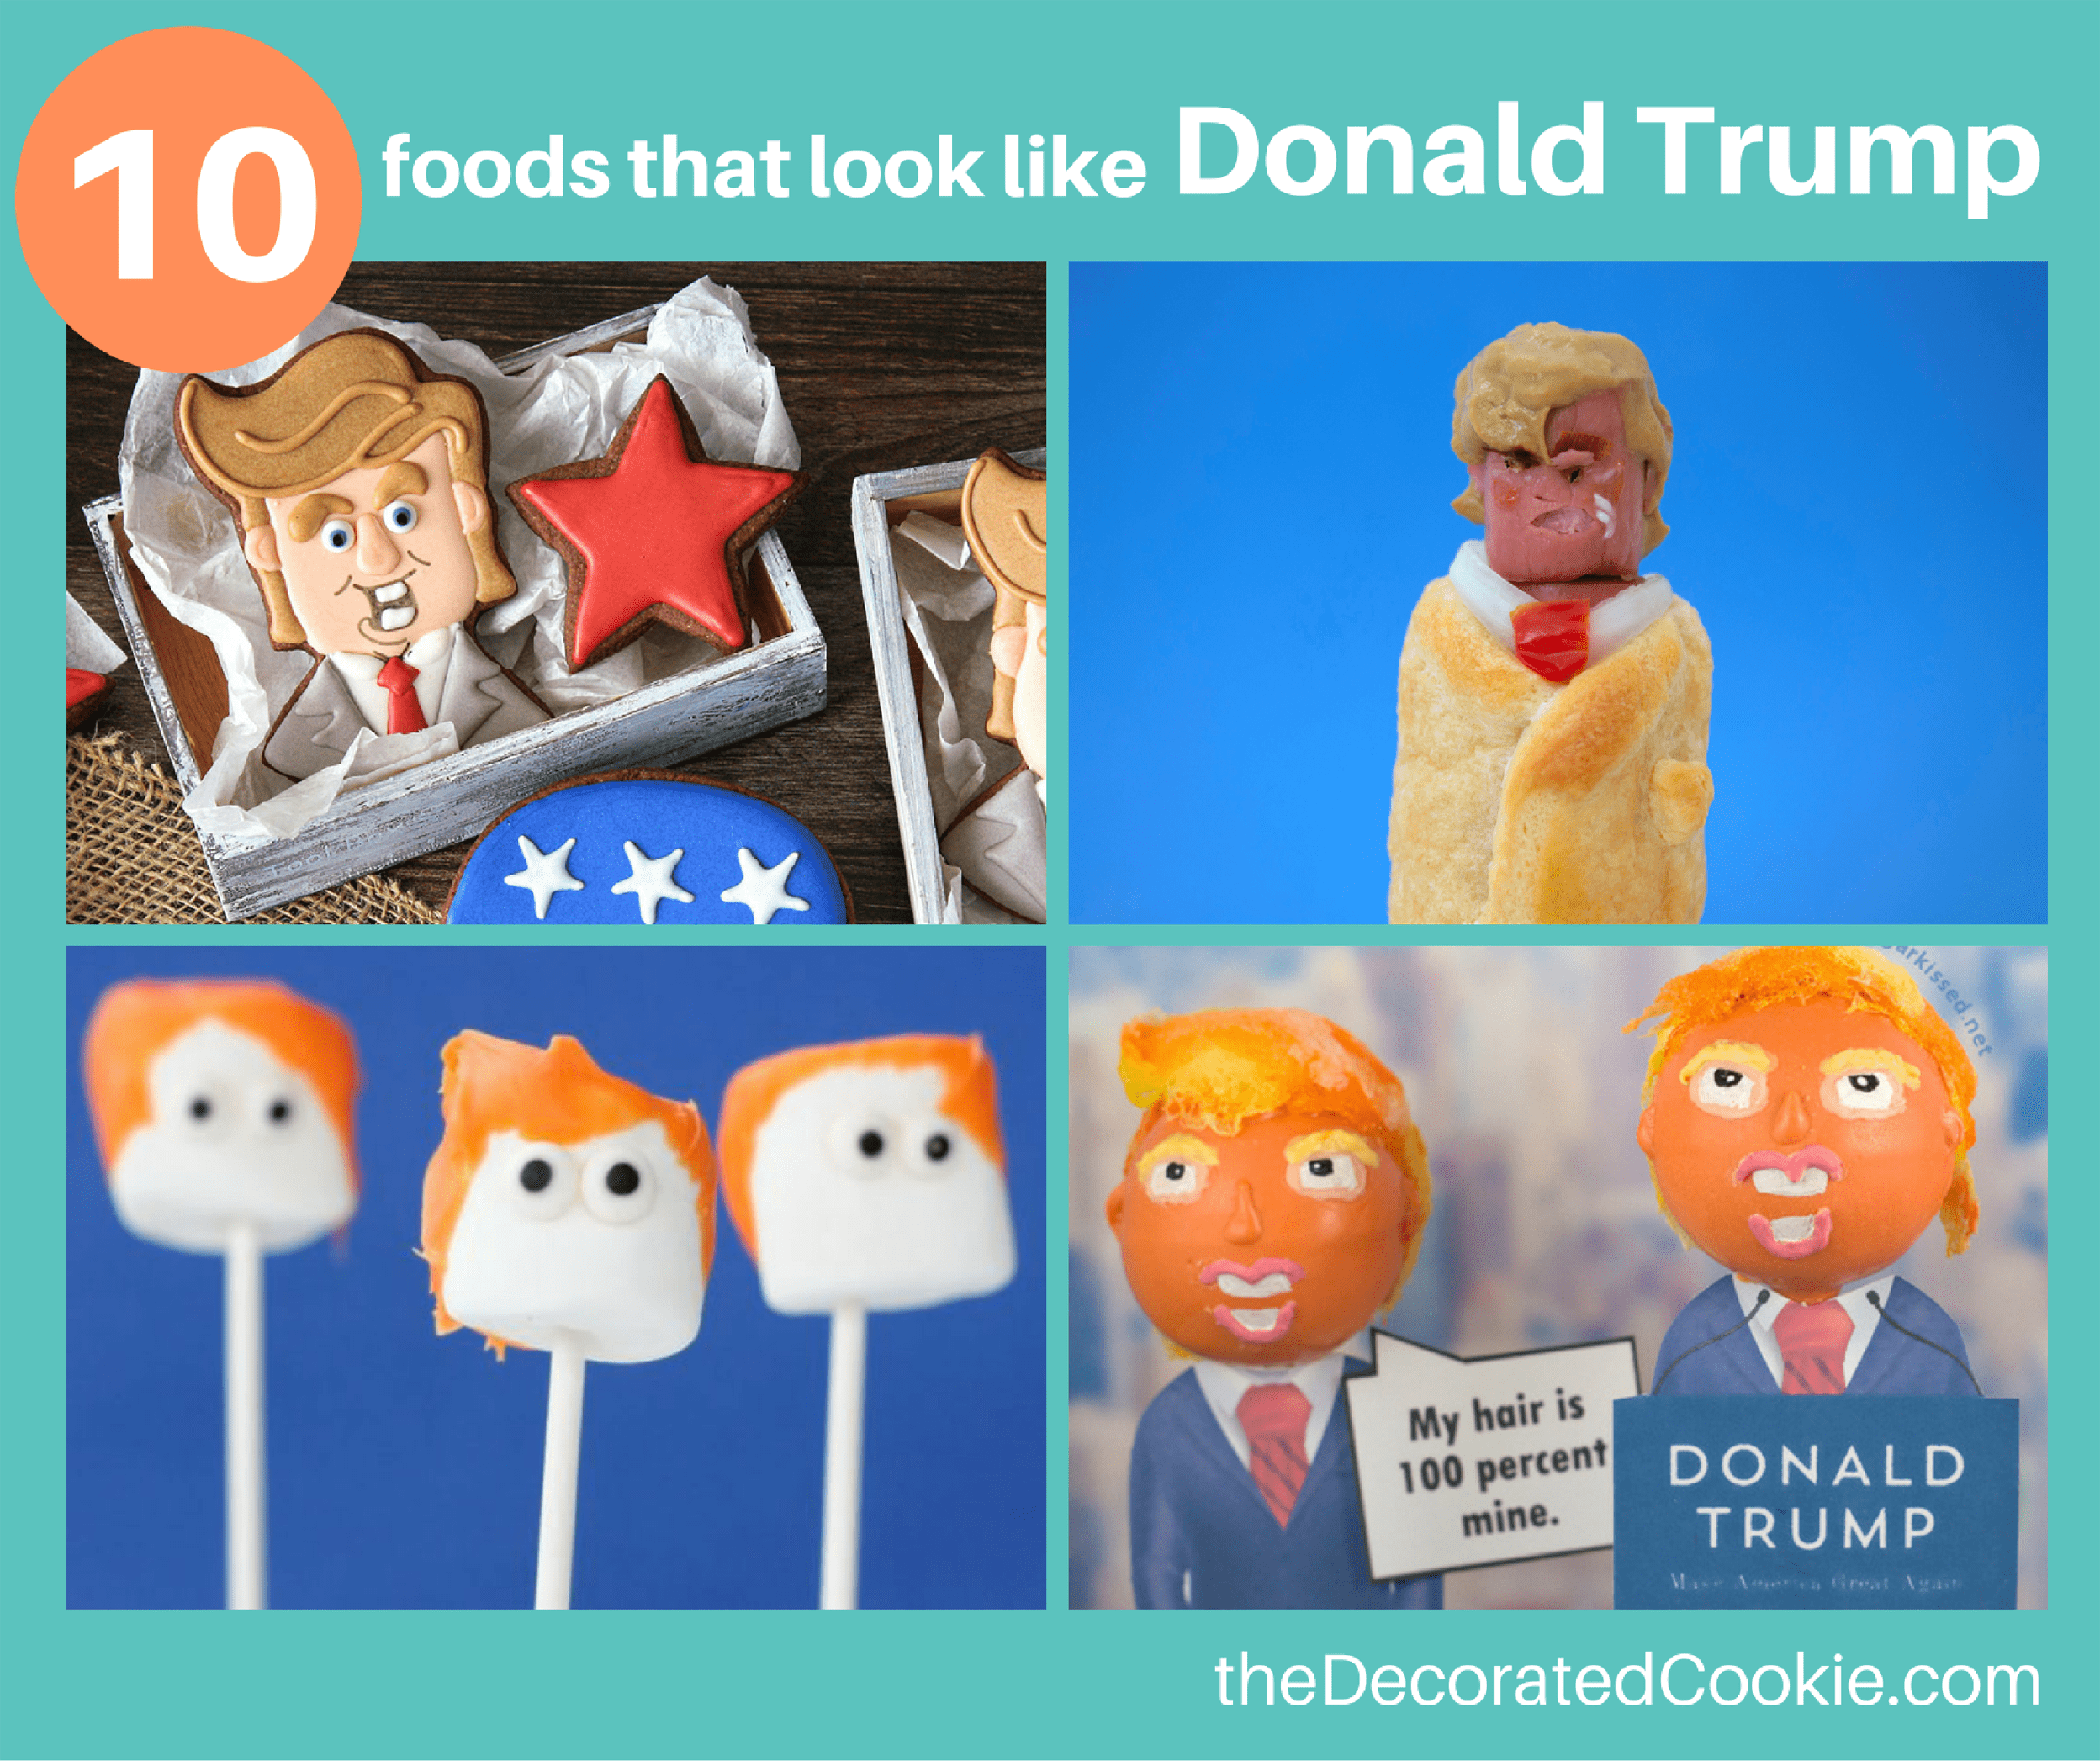 10 foods that look like Donald Trump